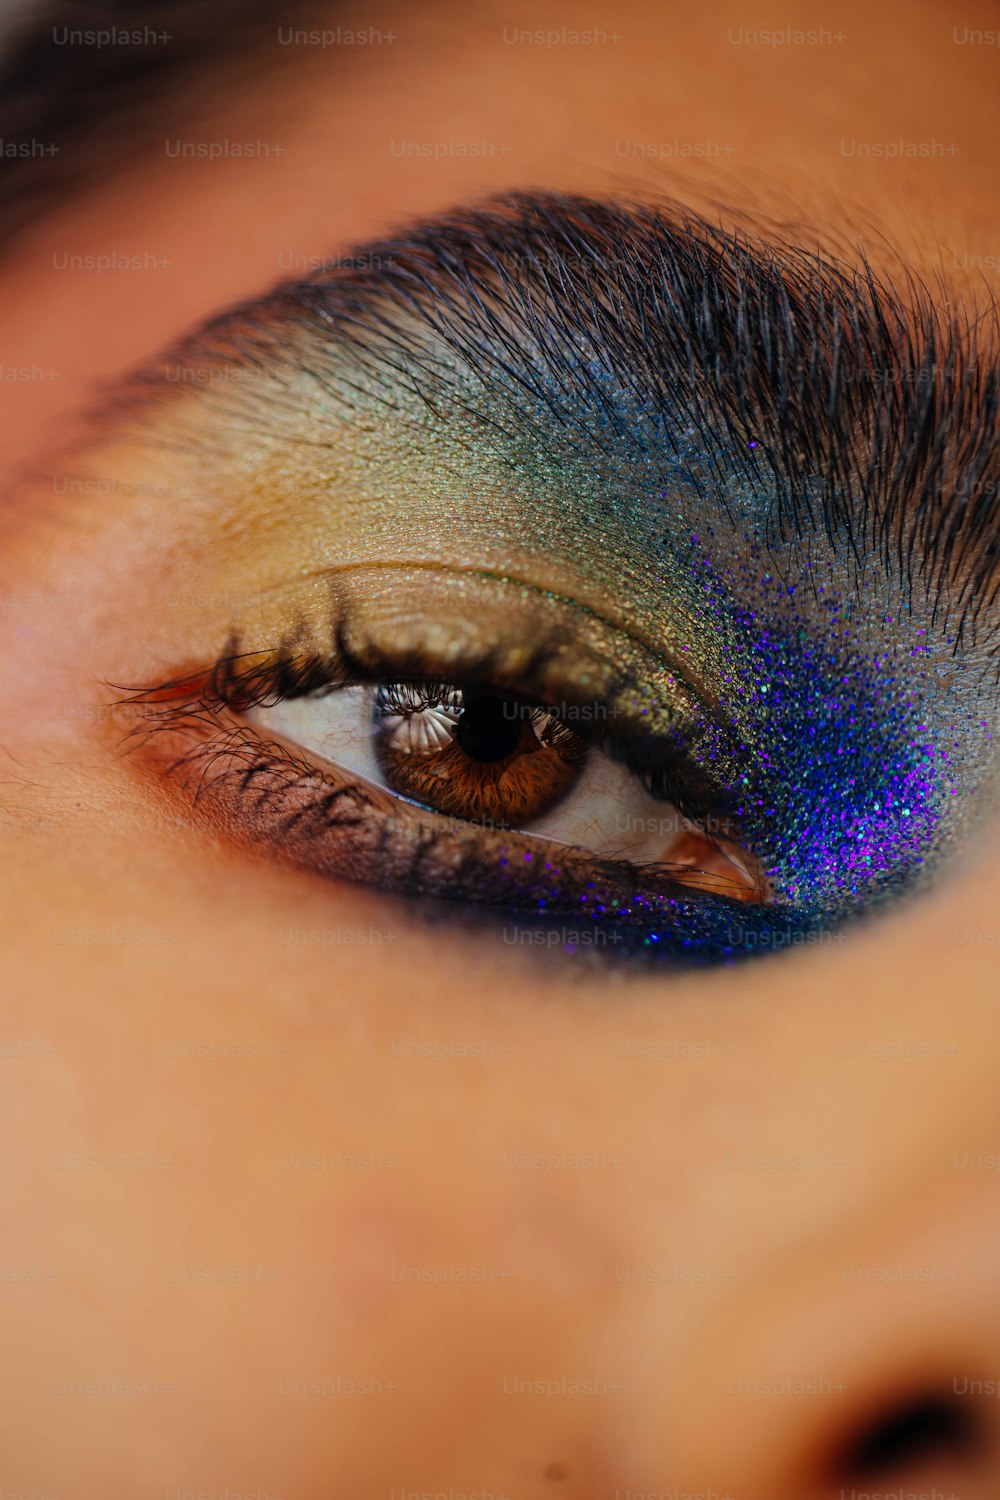 a close up of a person's eye with a blue and green eye shadow